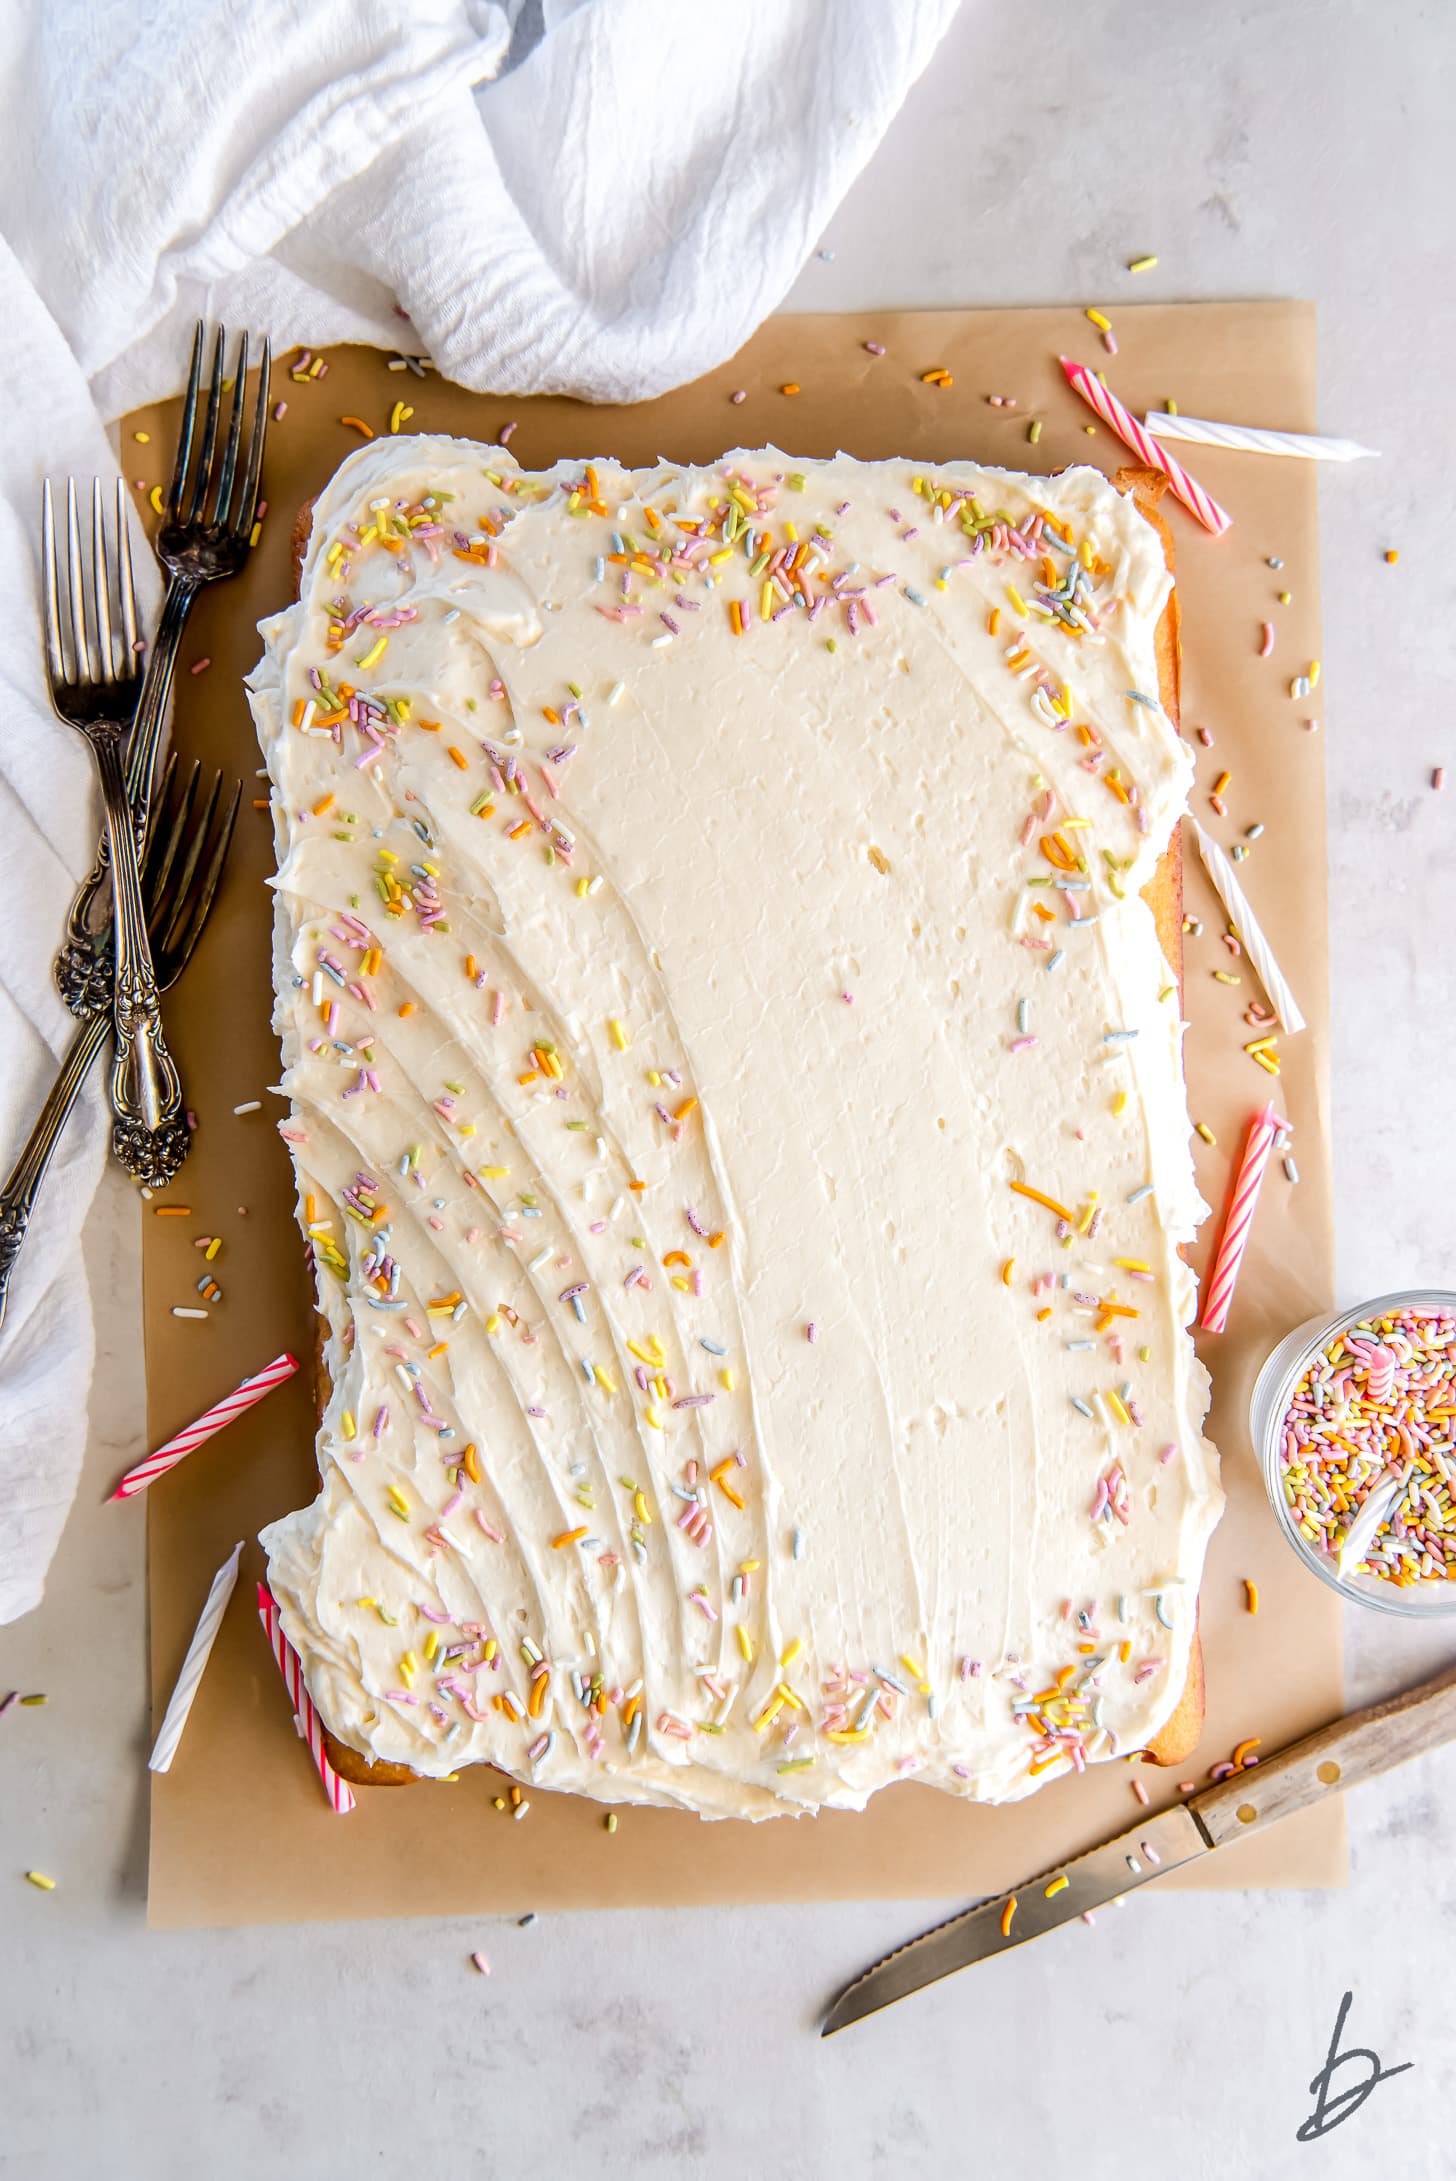 vanilla frosting and sprinkles on rectangle cake on parchment paper